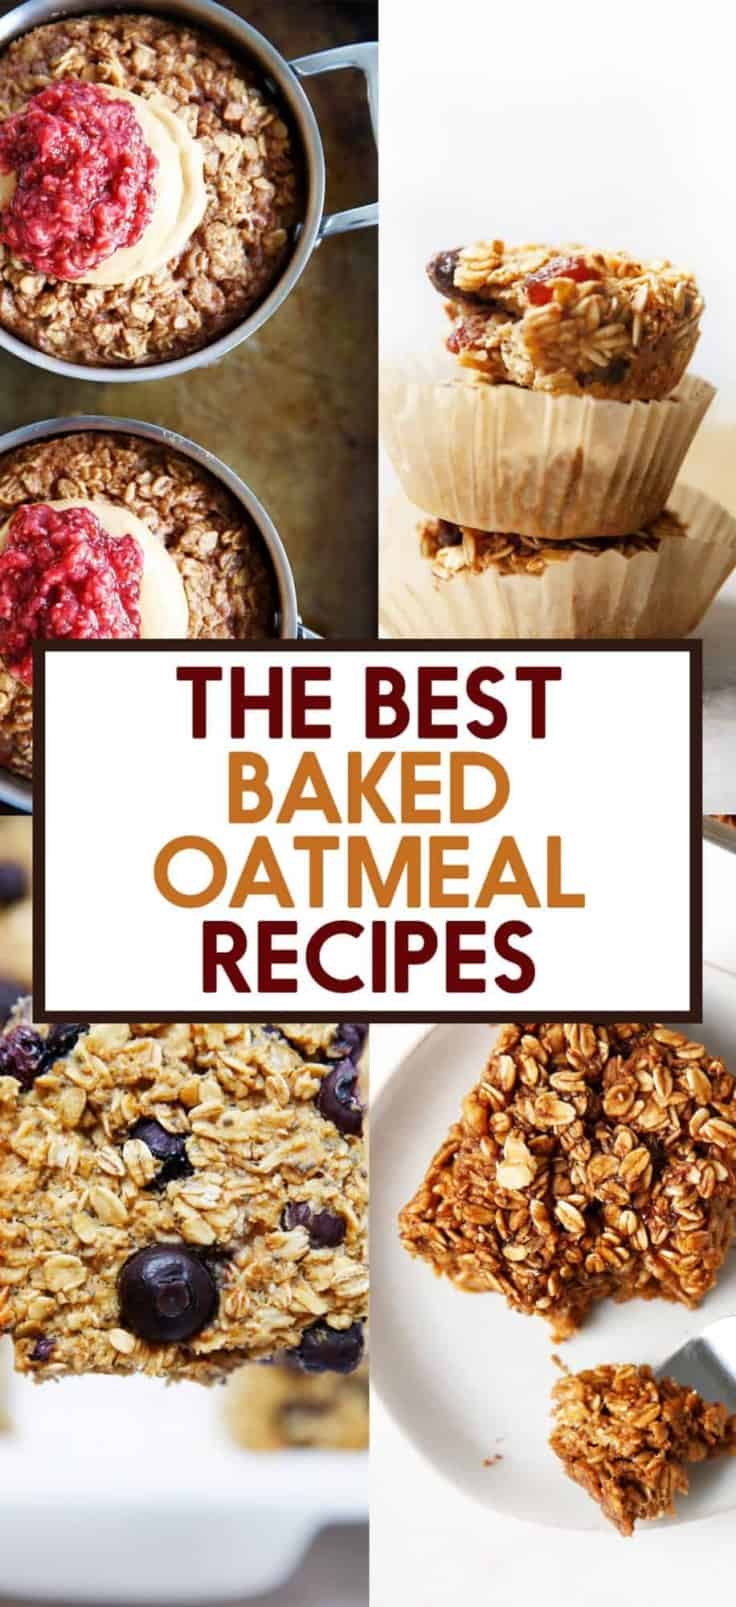 Our Favorite Baked Oatmeal Recipes - Lexi's Clean Kitchen